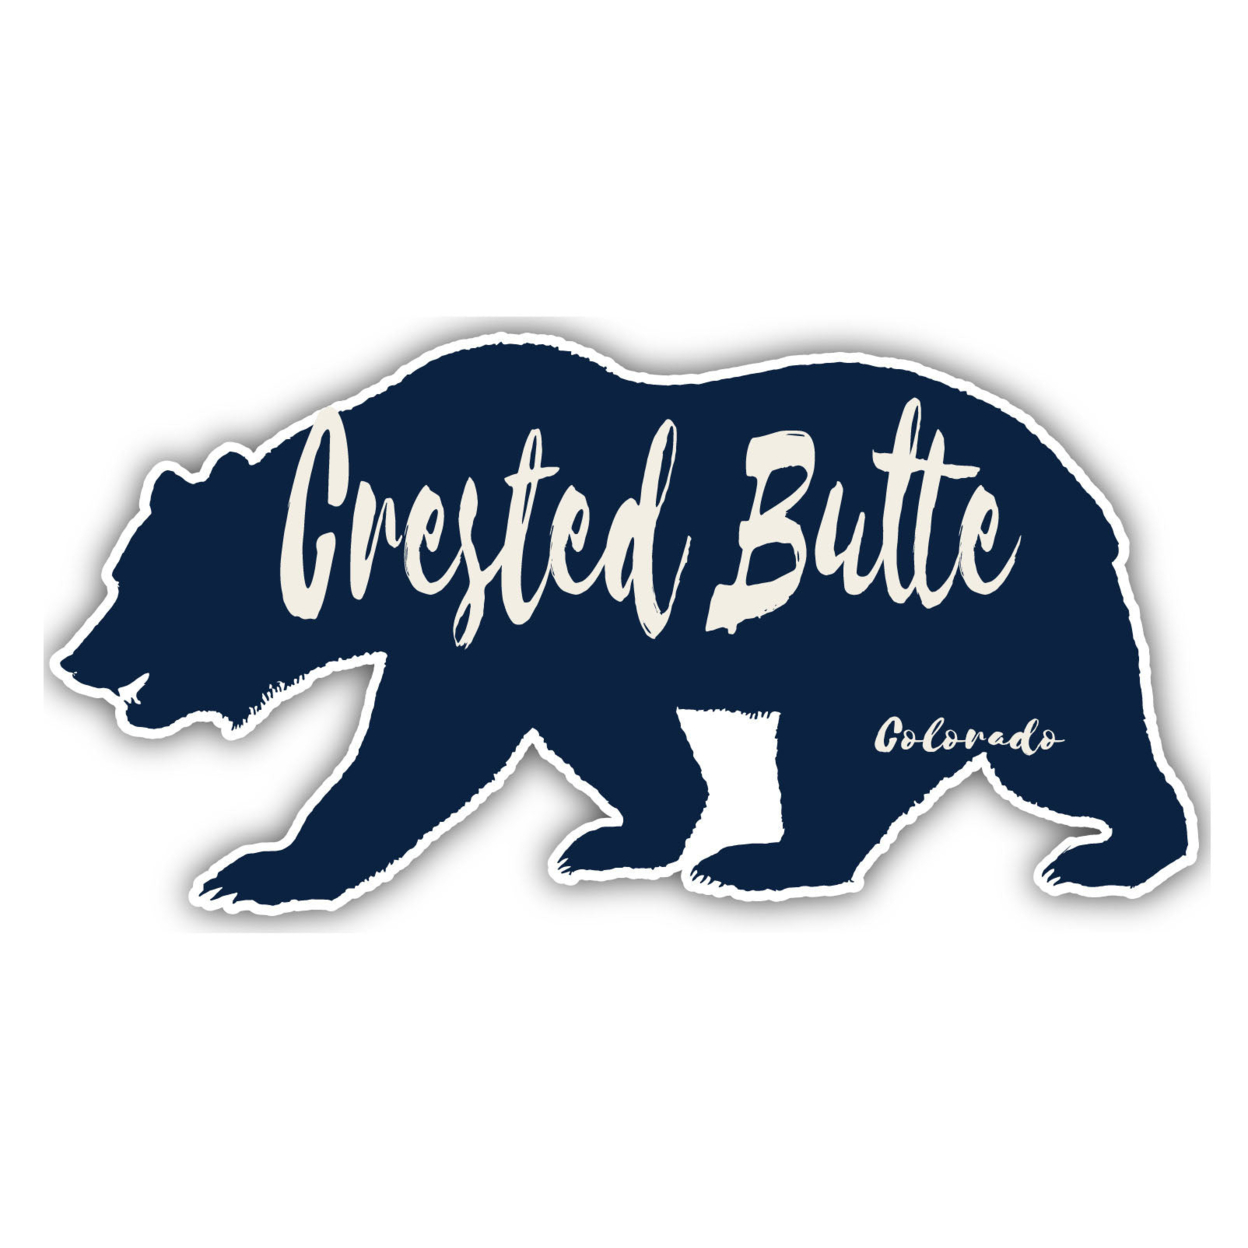 Crested Butte Colorado Souvenir Decorative Stickers (Choose Theme And Size) - 4-Pack, 4-Inch, Bear